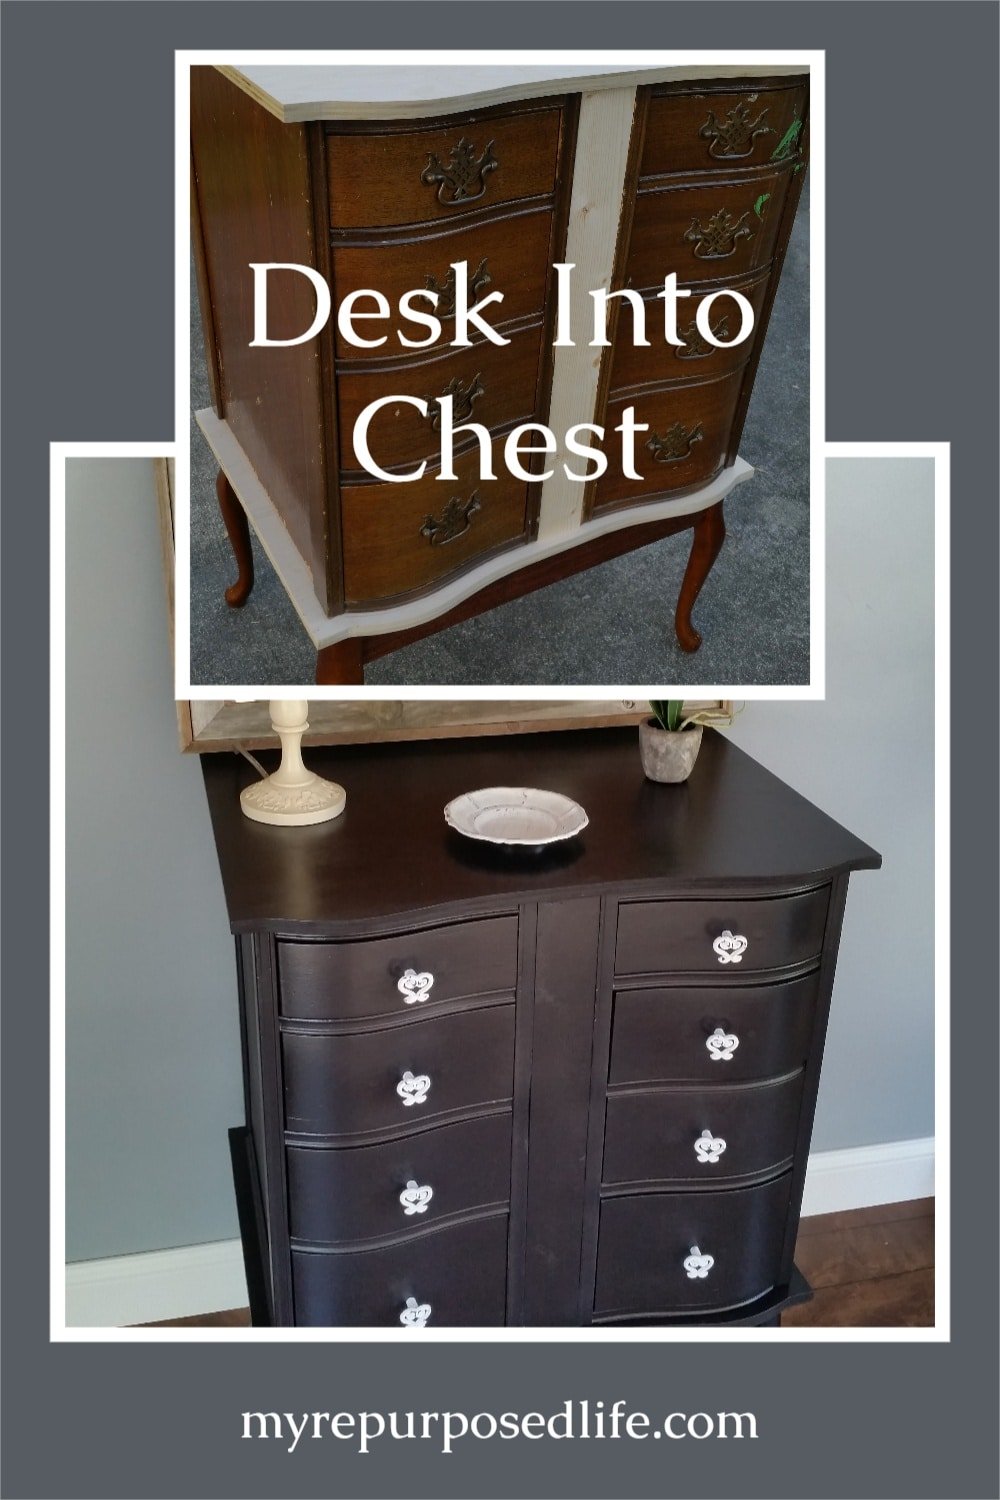 How to turn an old desk into a great new dressing table. Lots of storage, add baskets on the floor for even more organization. #MyRepurposedLife #repurposed #furniture #desk #dressingtable #chest via @repurposedlife